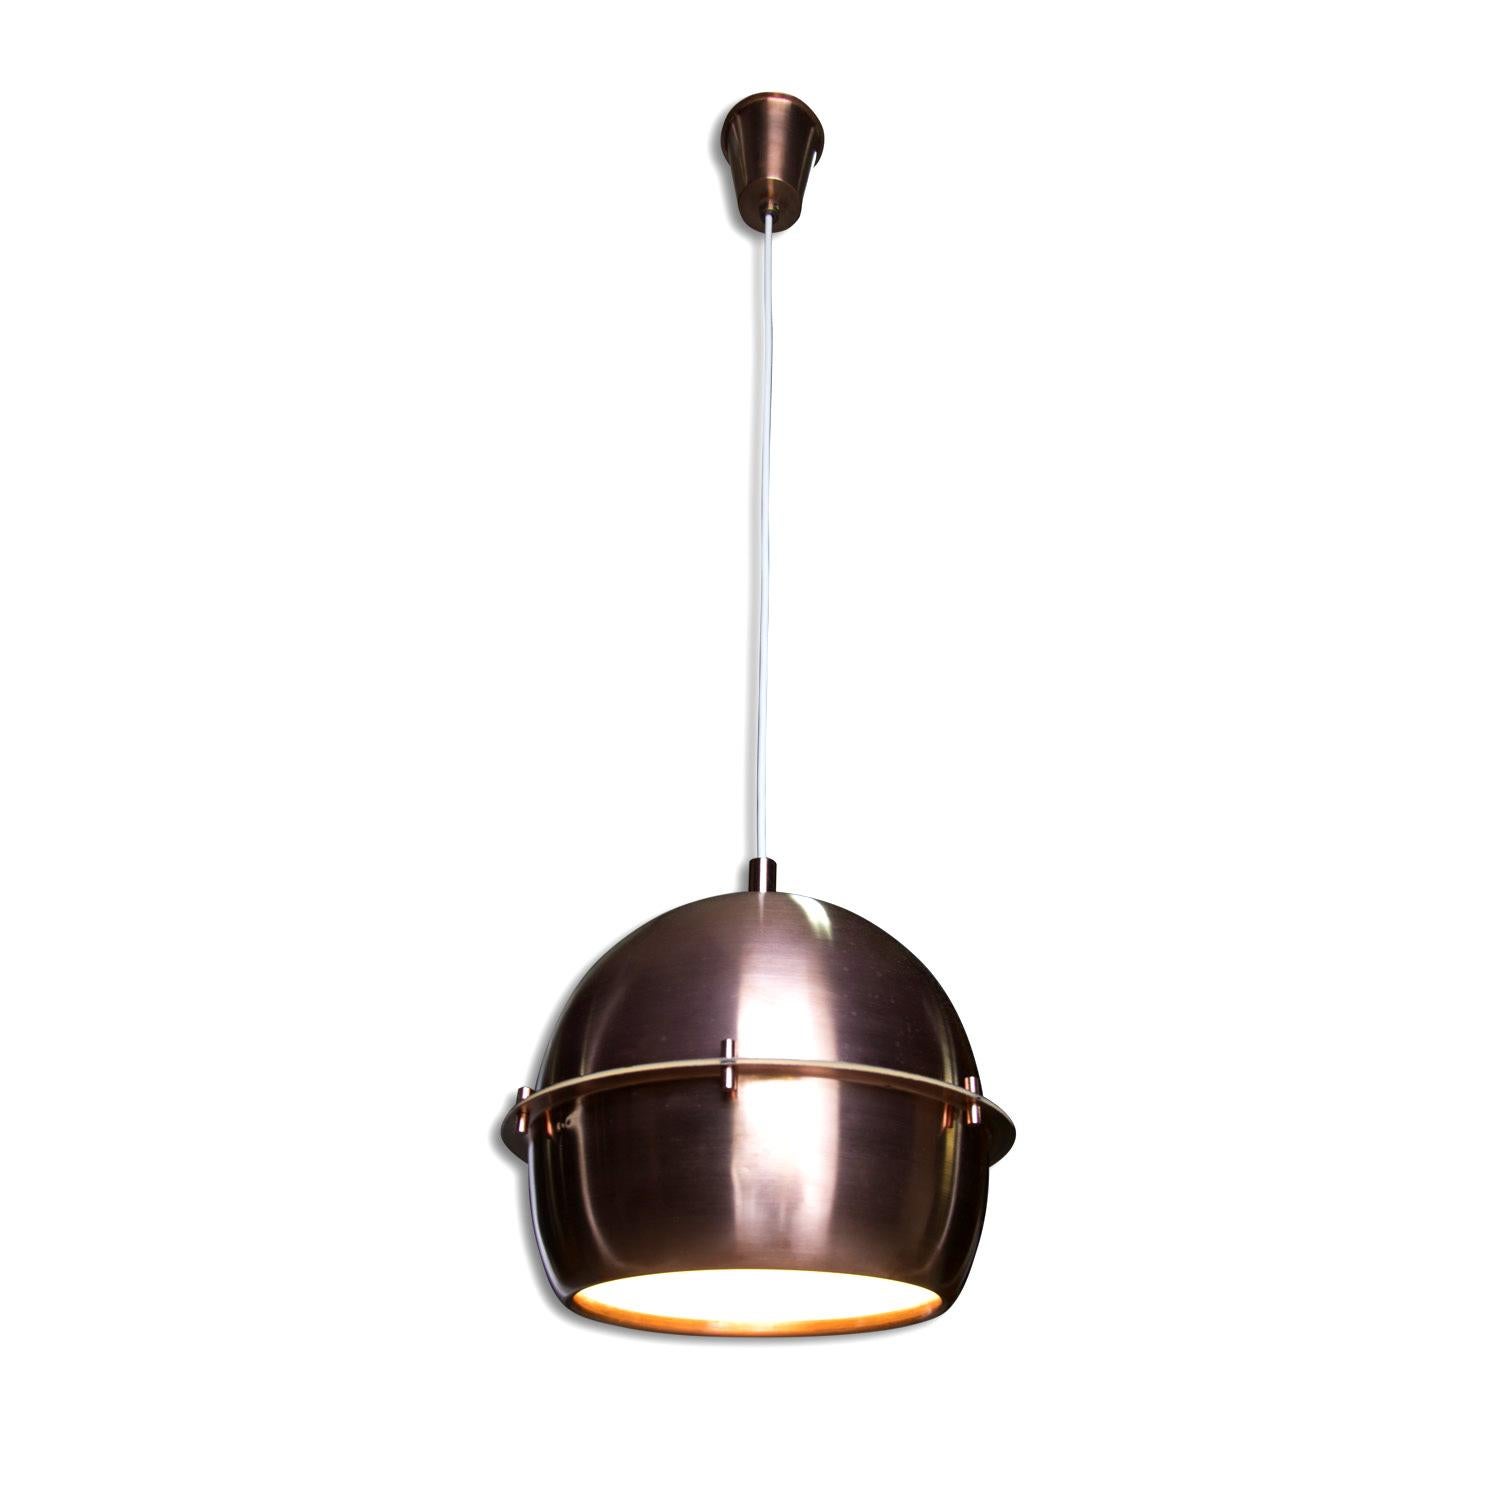 Vintage Space Age copper hanging chandelier, Germany, 1960s. Interesting shape of lampshades. The lamp is fully restored and cleaned, new wiring.

Measure: Height 96 cm, diameter 31 cm.